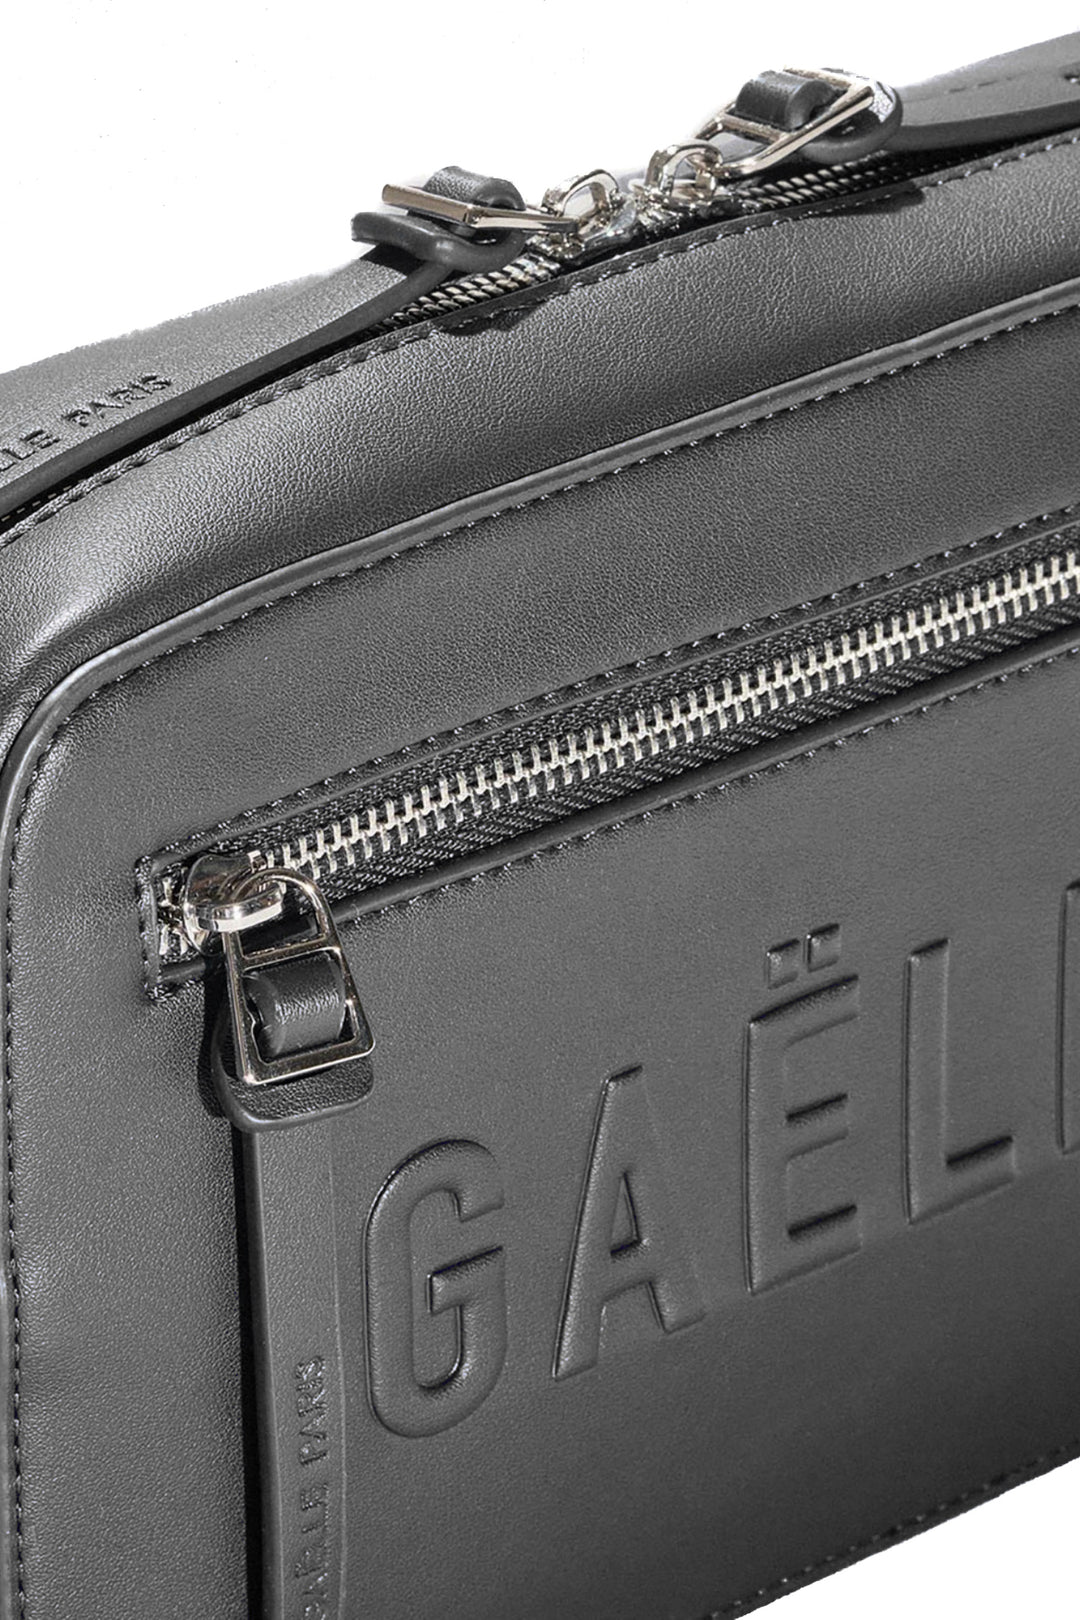 Gaelle Pochette Man in faux leather with handle and logo